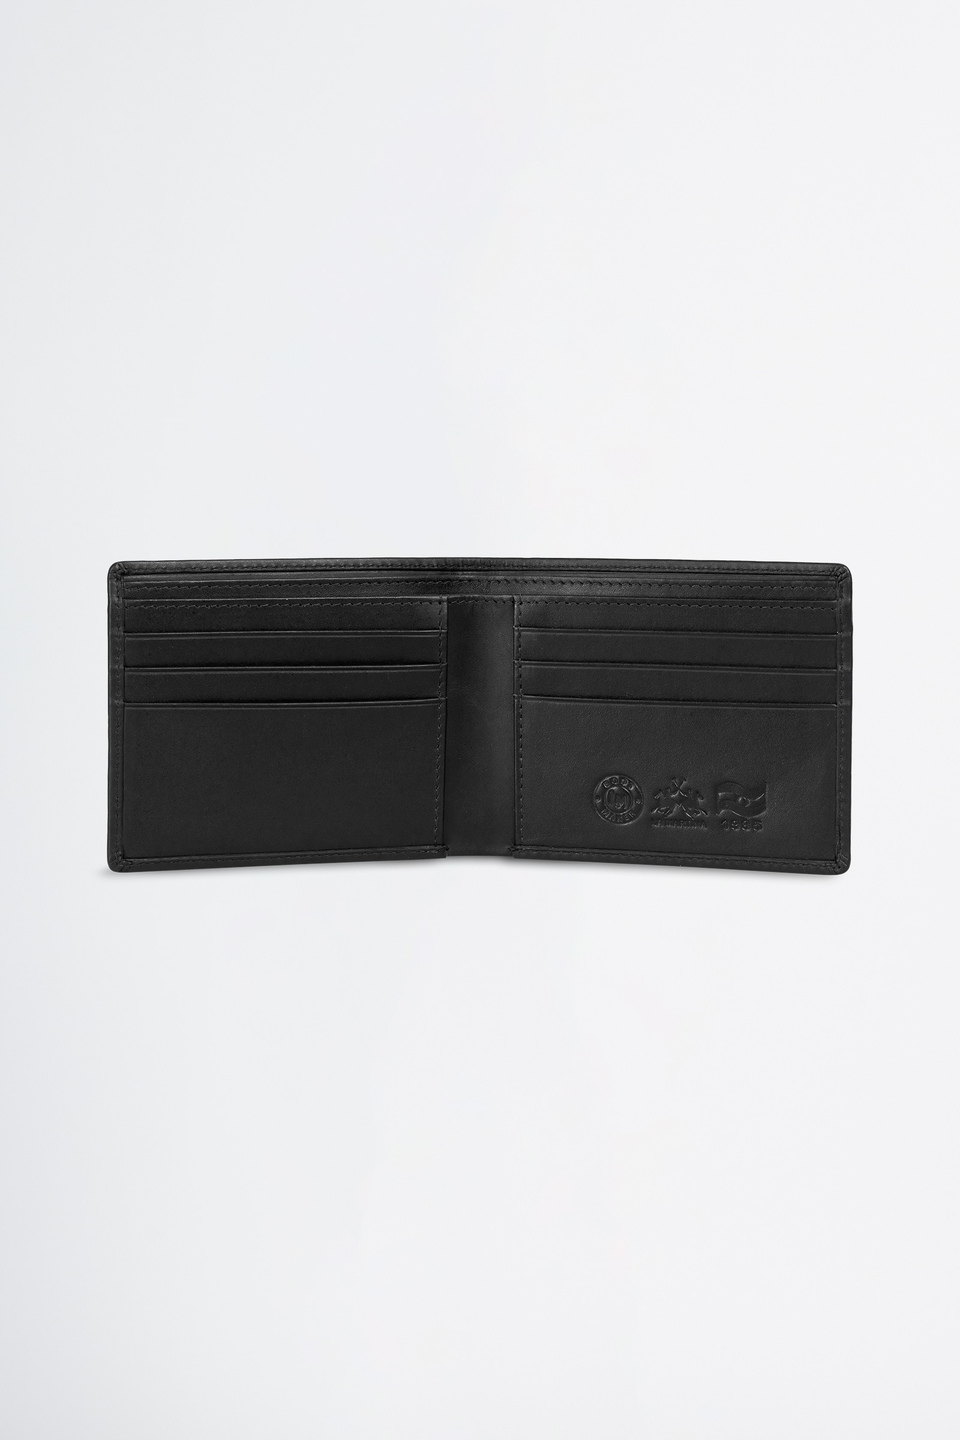 Mens Accessories Wallets and cardholders Save 34% La Martina Leather Wallet in Nero for Men Black 